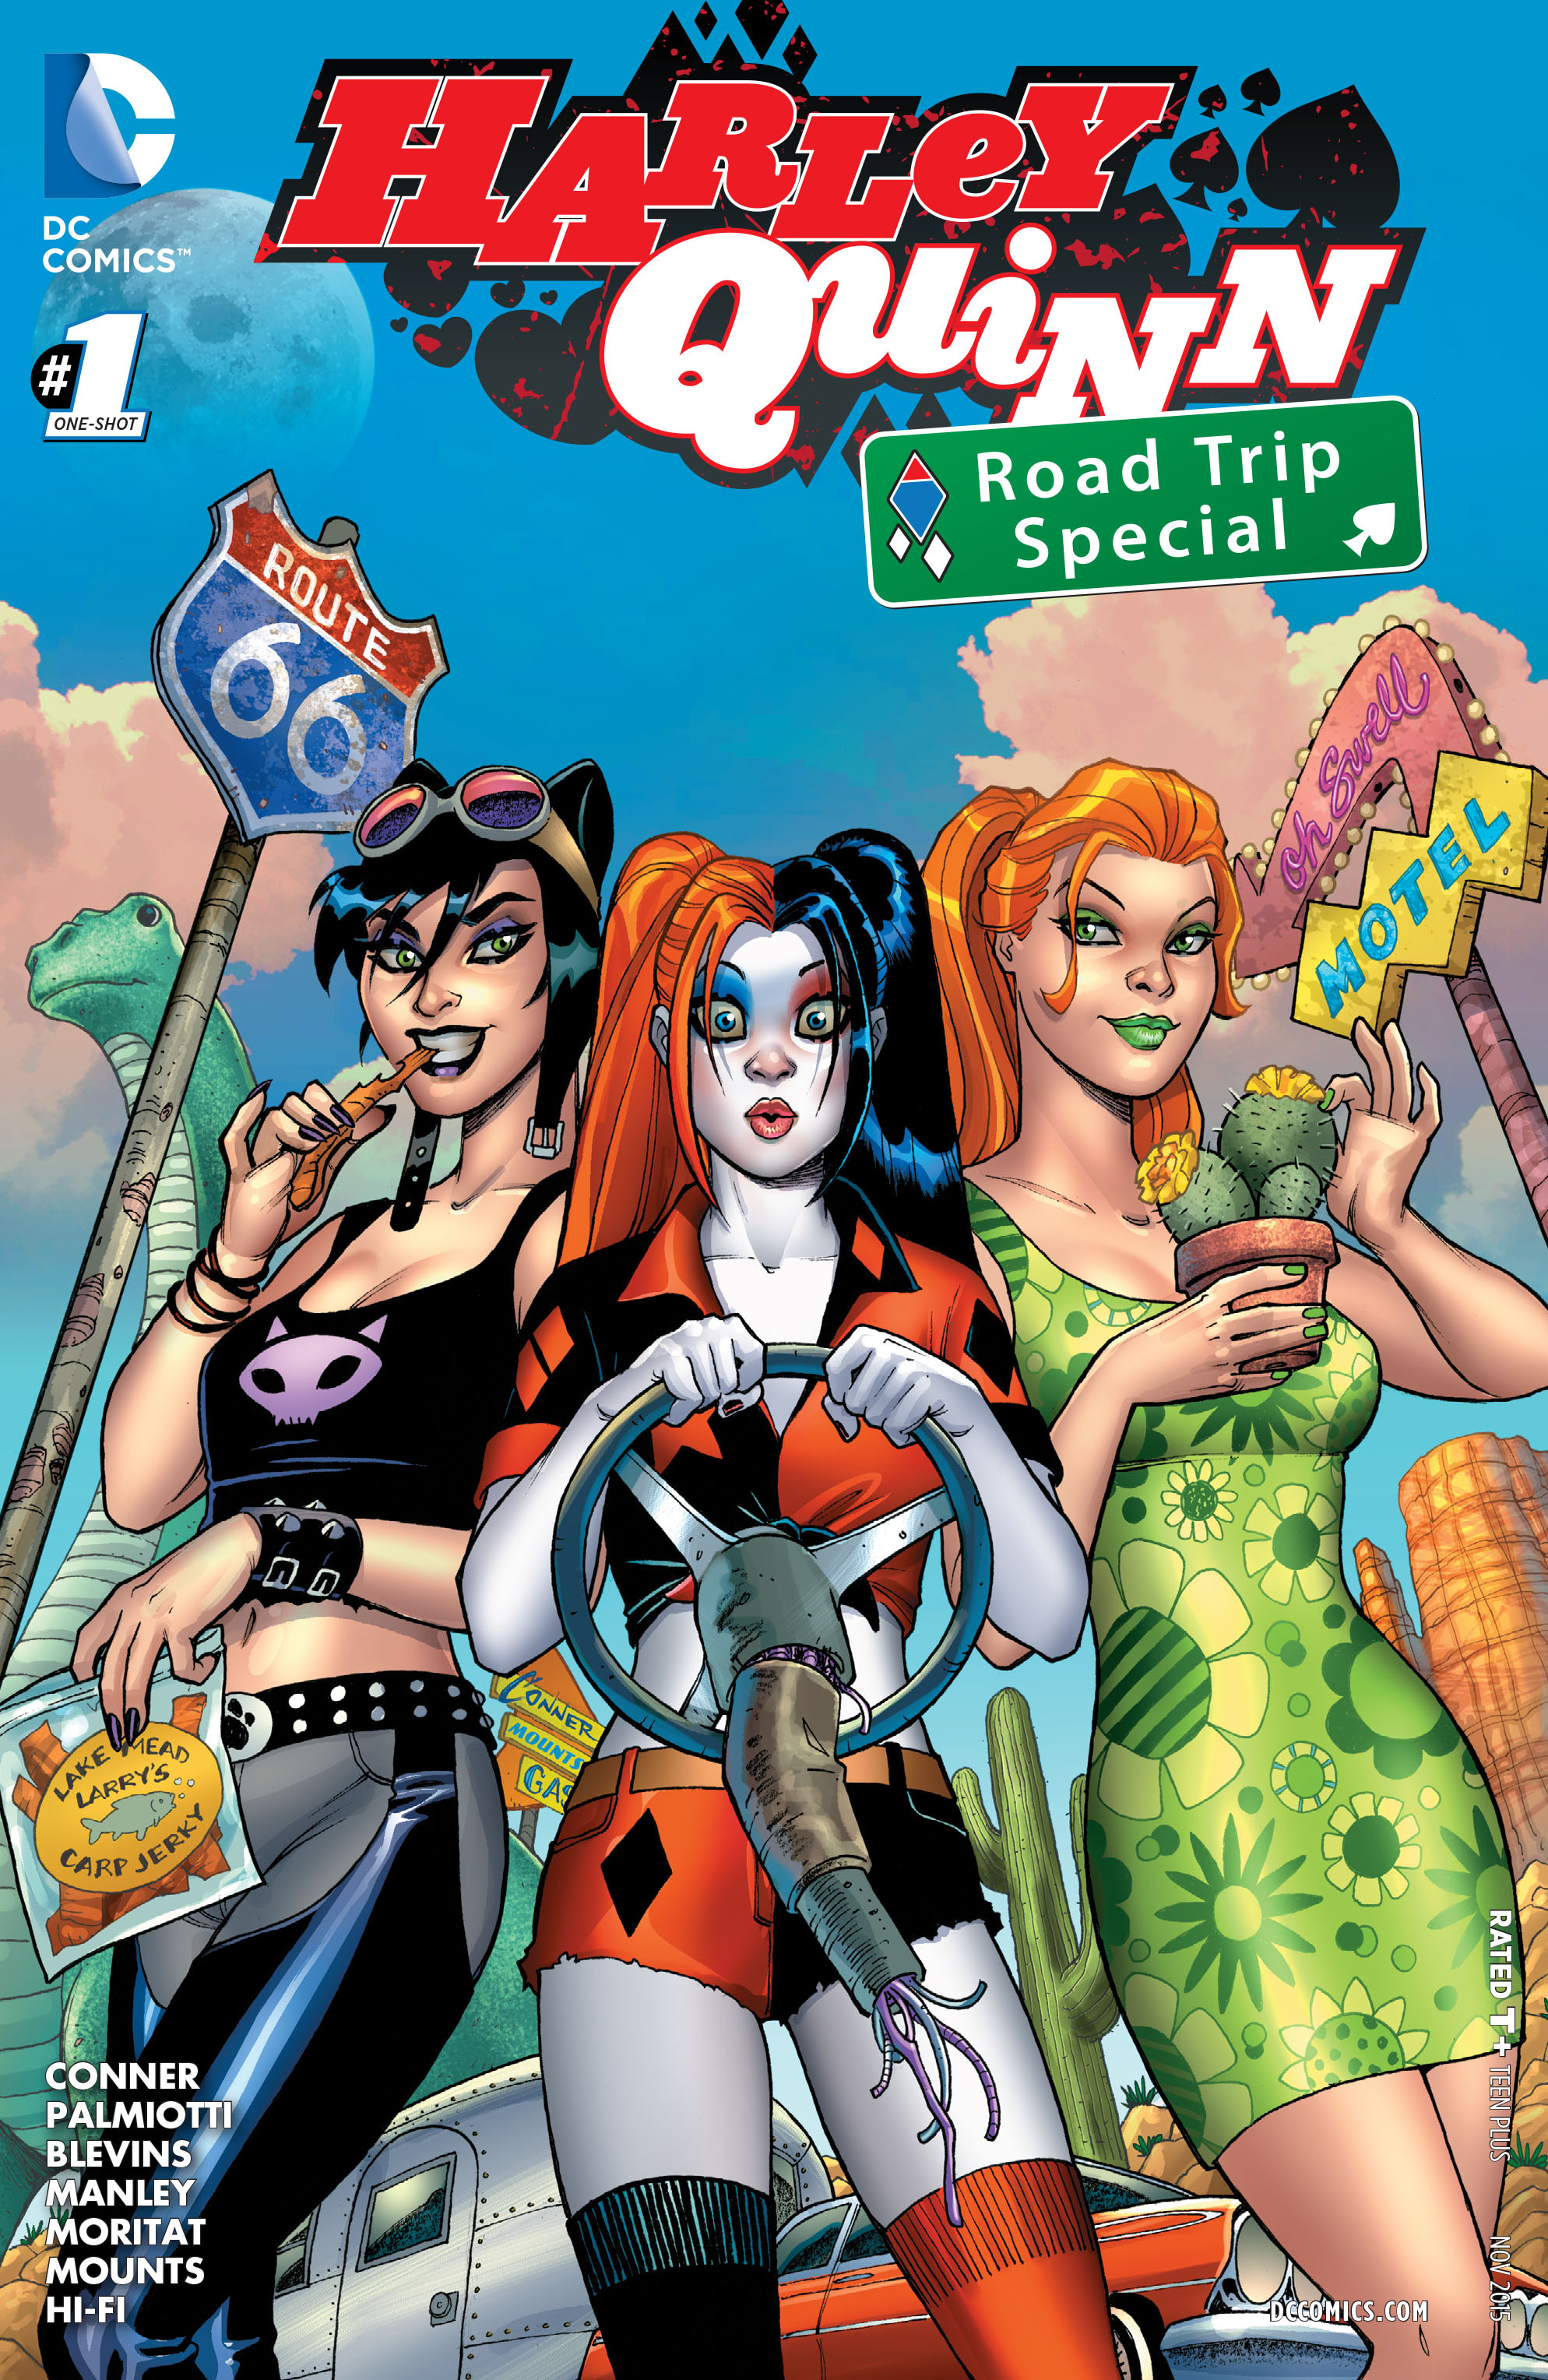 Read online Harley Quinn Road Trip Special comic -  Issue # Full - 1